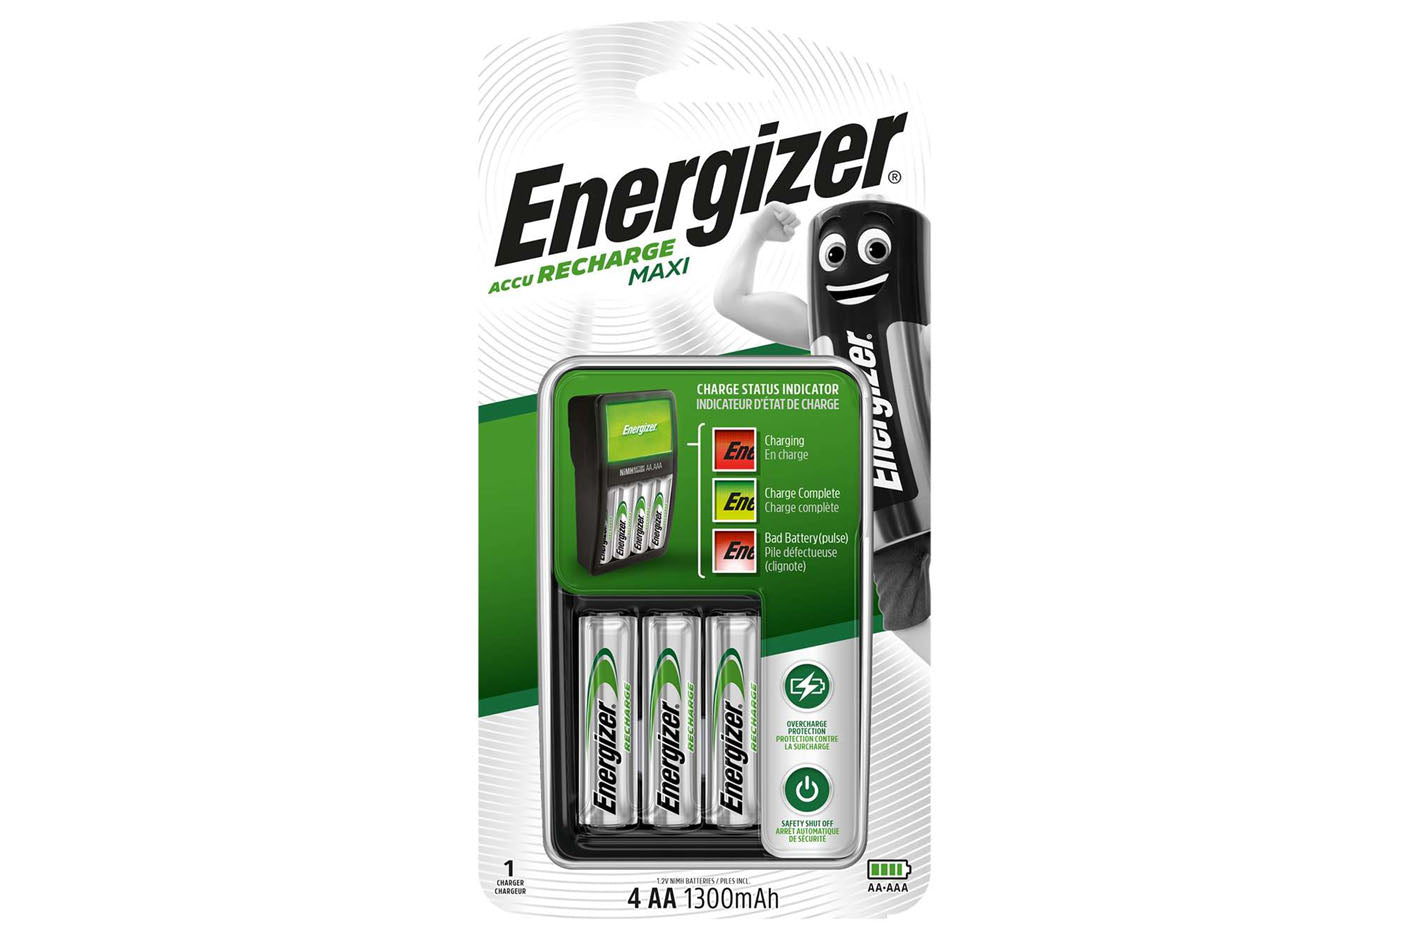 Energizer Maxi Charger with 4x 1300mAh Rechargeable AA Batteries, Batteries, Maplin